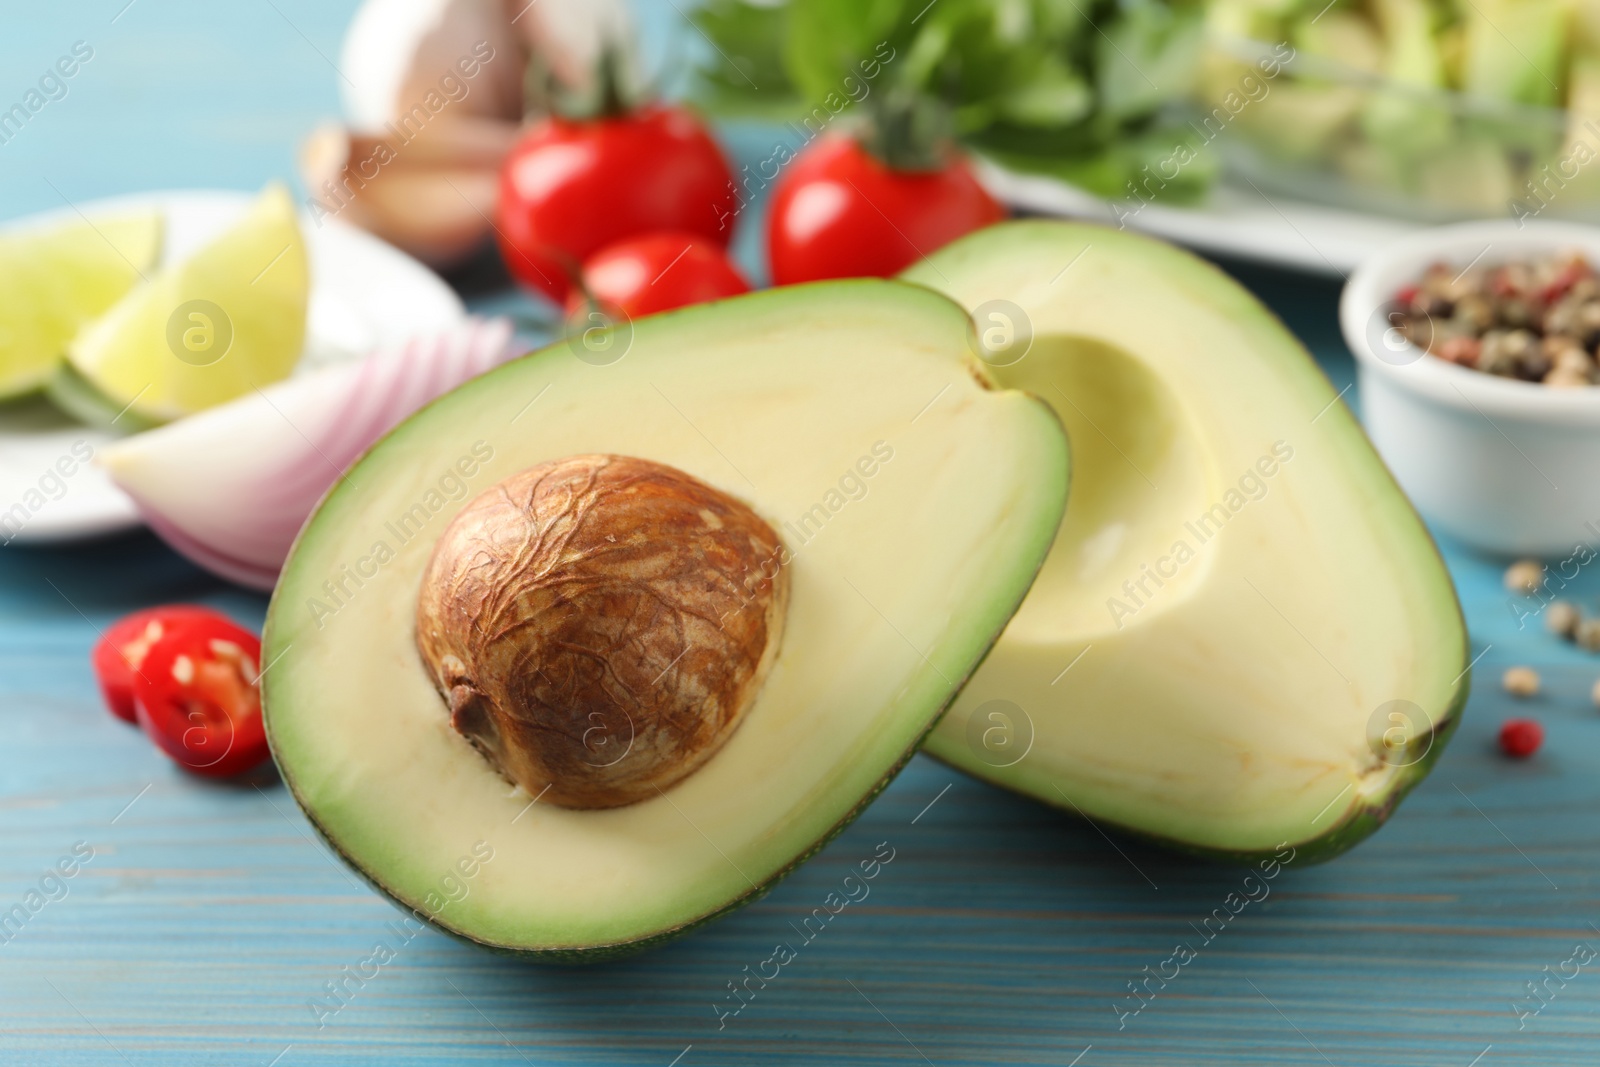 Photo of Fresh ripe avocado and other ingredients for guacamole on light blue wooden table, closeup